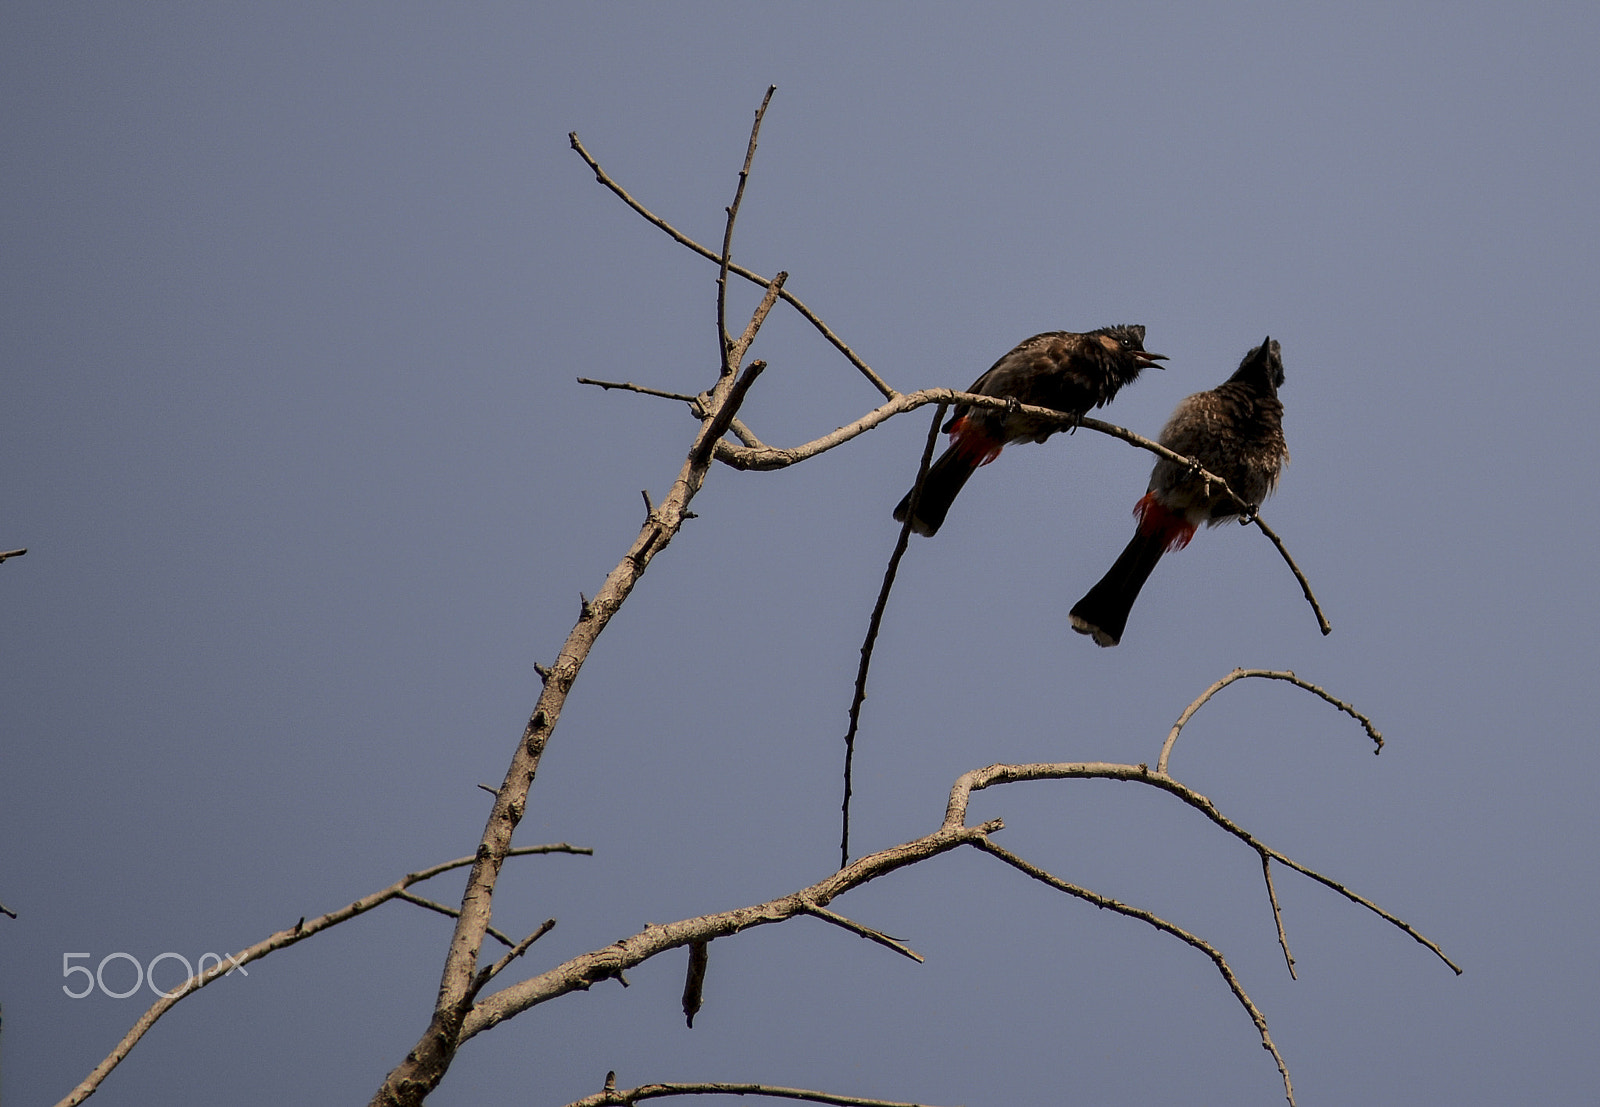 Nikon D5200 + Sigma 70-300mm F4-5.6 DG OS sample photo. Whispering of red-vented bulbul (pycnonotus cafer) photography